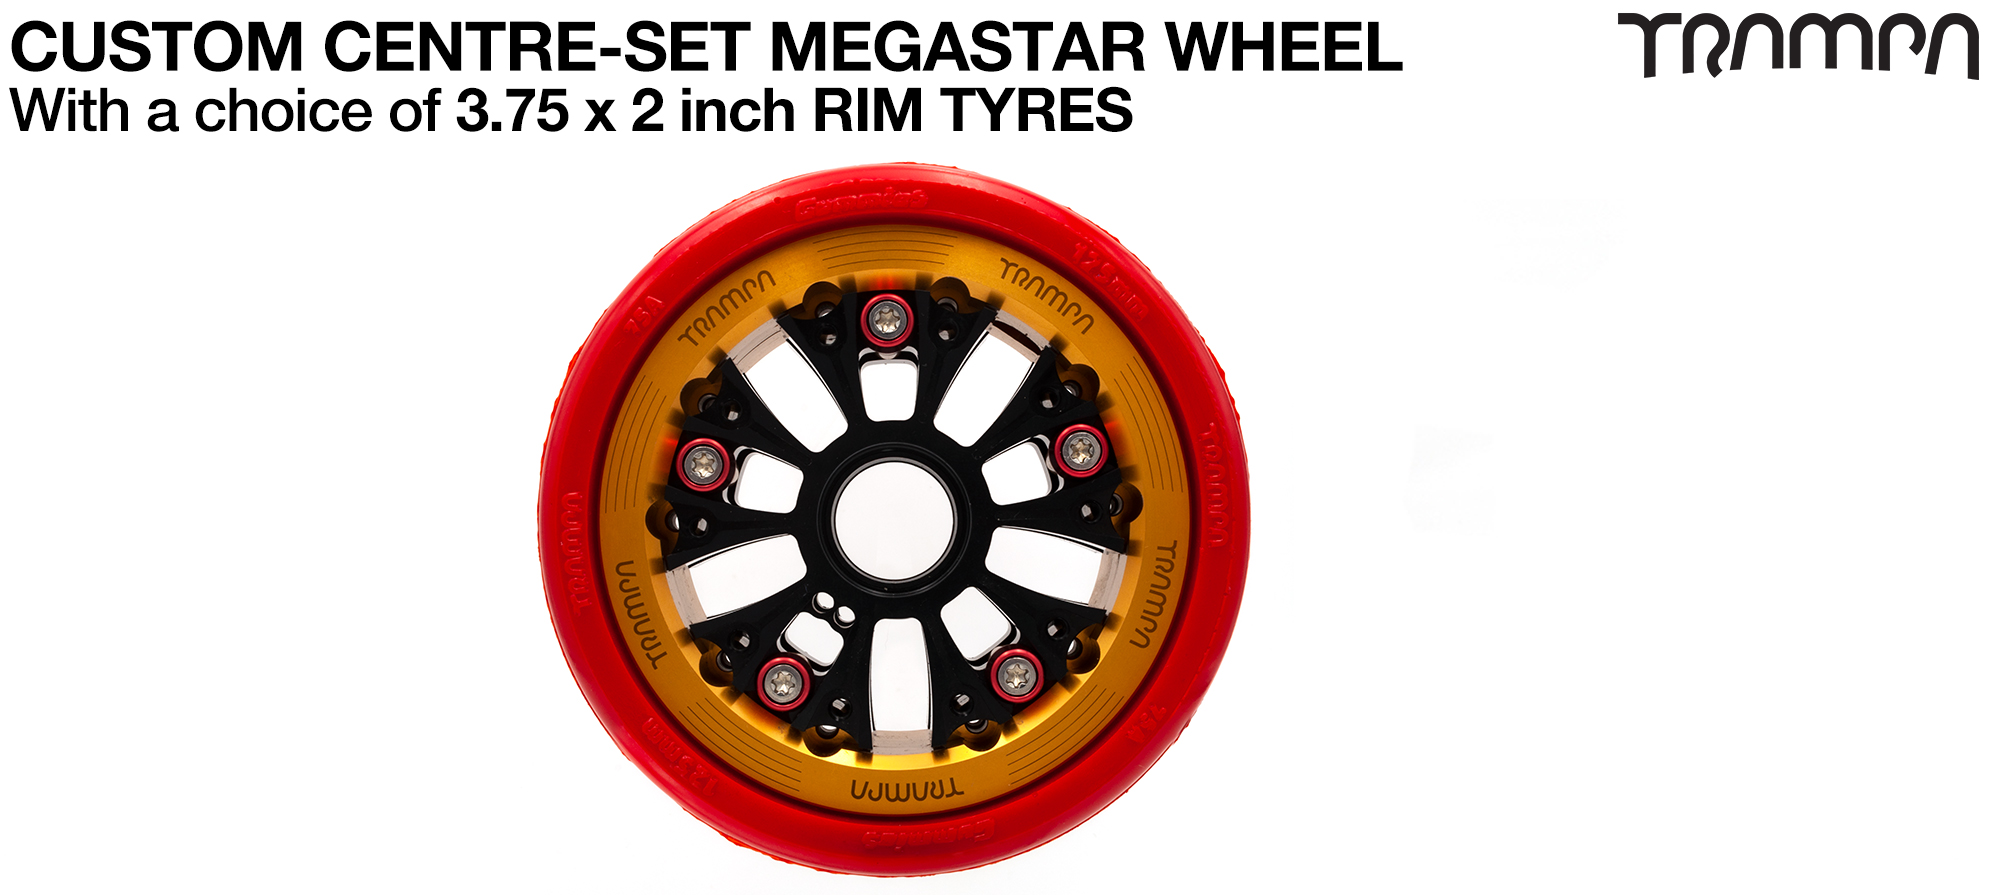 MEGASTAR 8 CENTRE-SET Wheels will fit any Tire TRAMPA offers up to 8 inches in Diameter